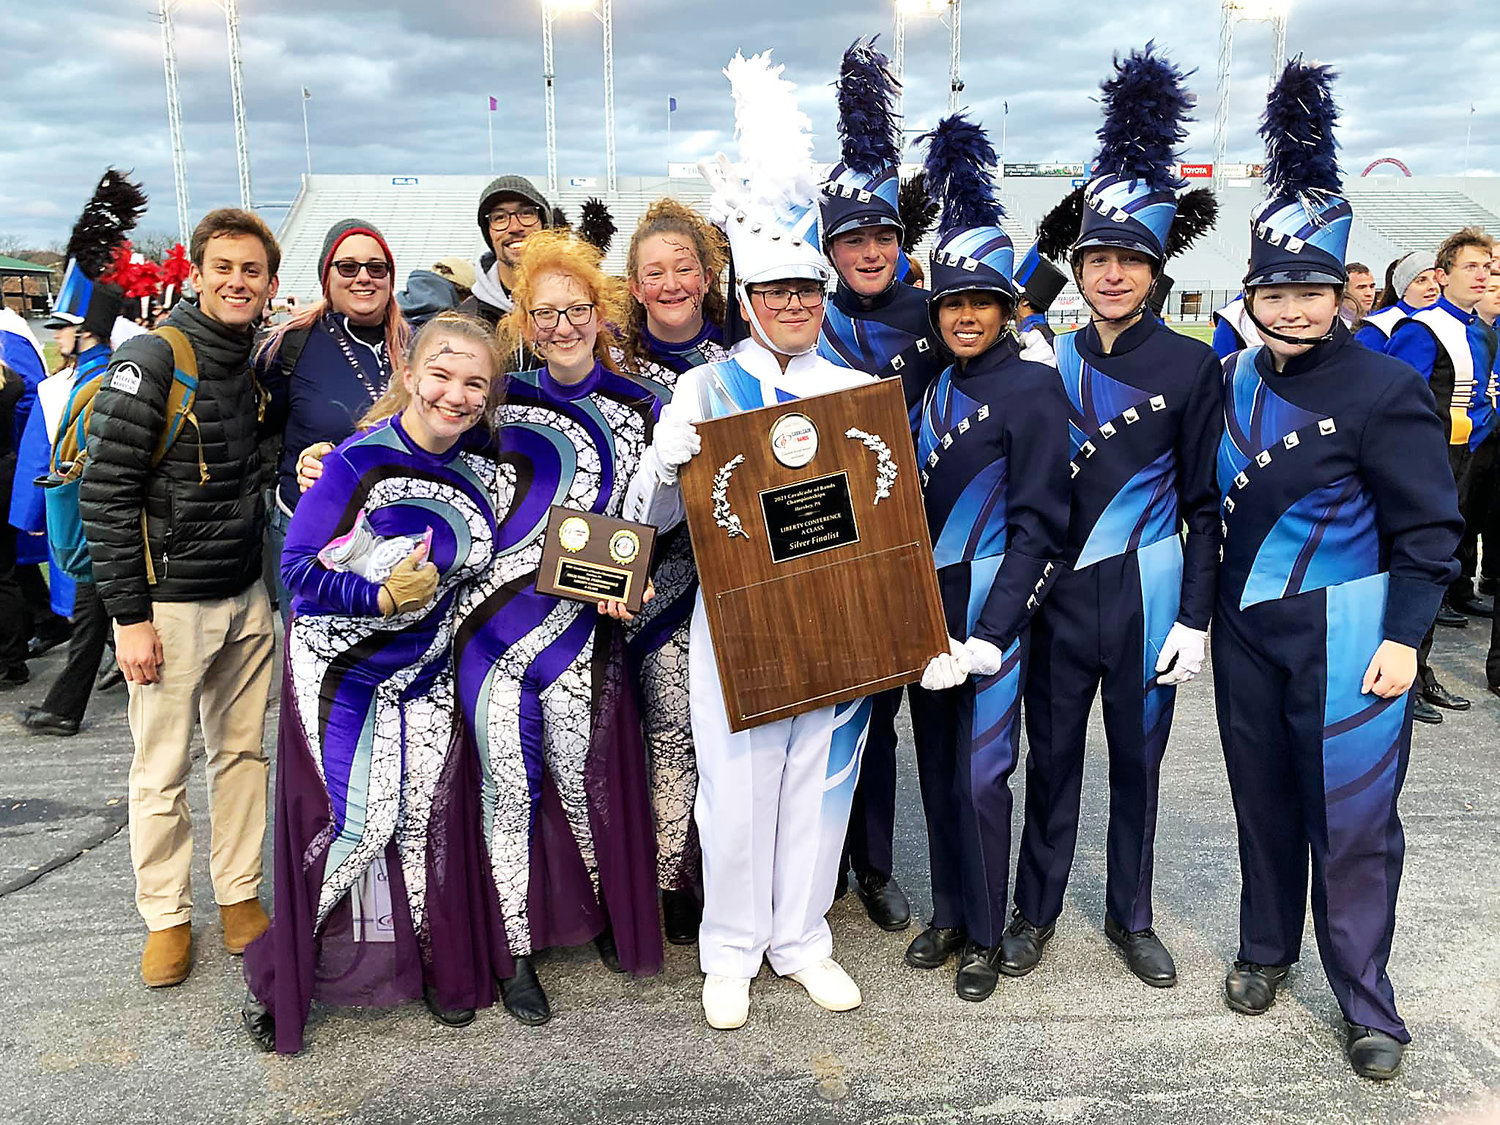 The Council Rock North Marching Band soared to second place in its division at the Cavalcade of Bands championship in Hershey,  coming in less than a point behind the top prize winner. The 59-member ensemble also won the High Visual Performance award in the Liberty A division.